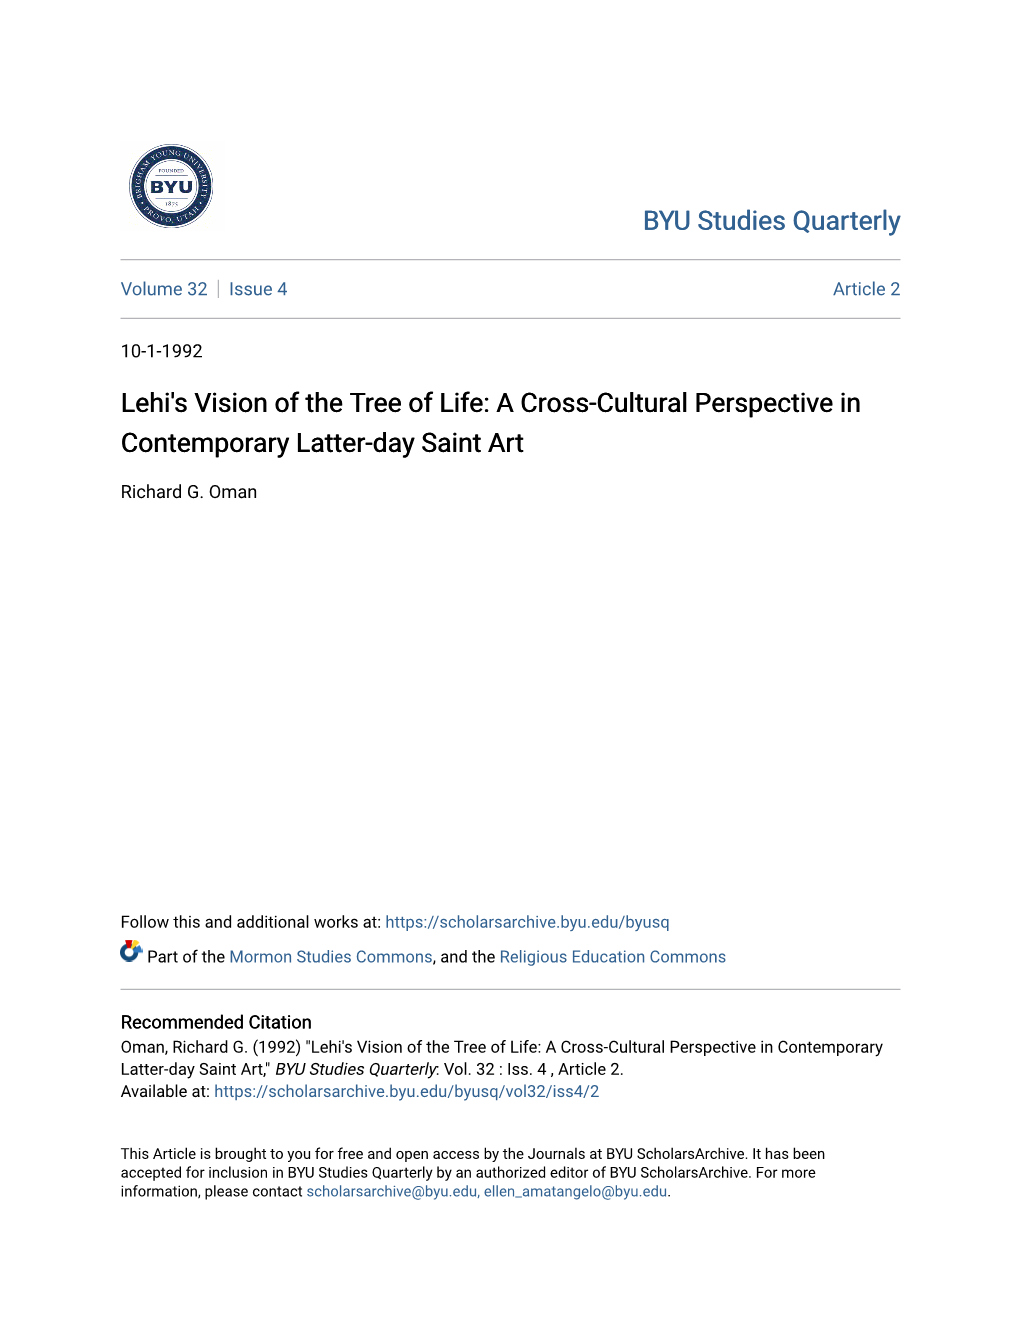 A Cross-Cultural Perspective in Contemporary Latter-Day Saint Art